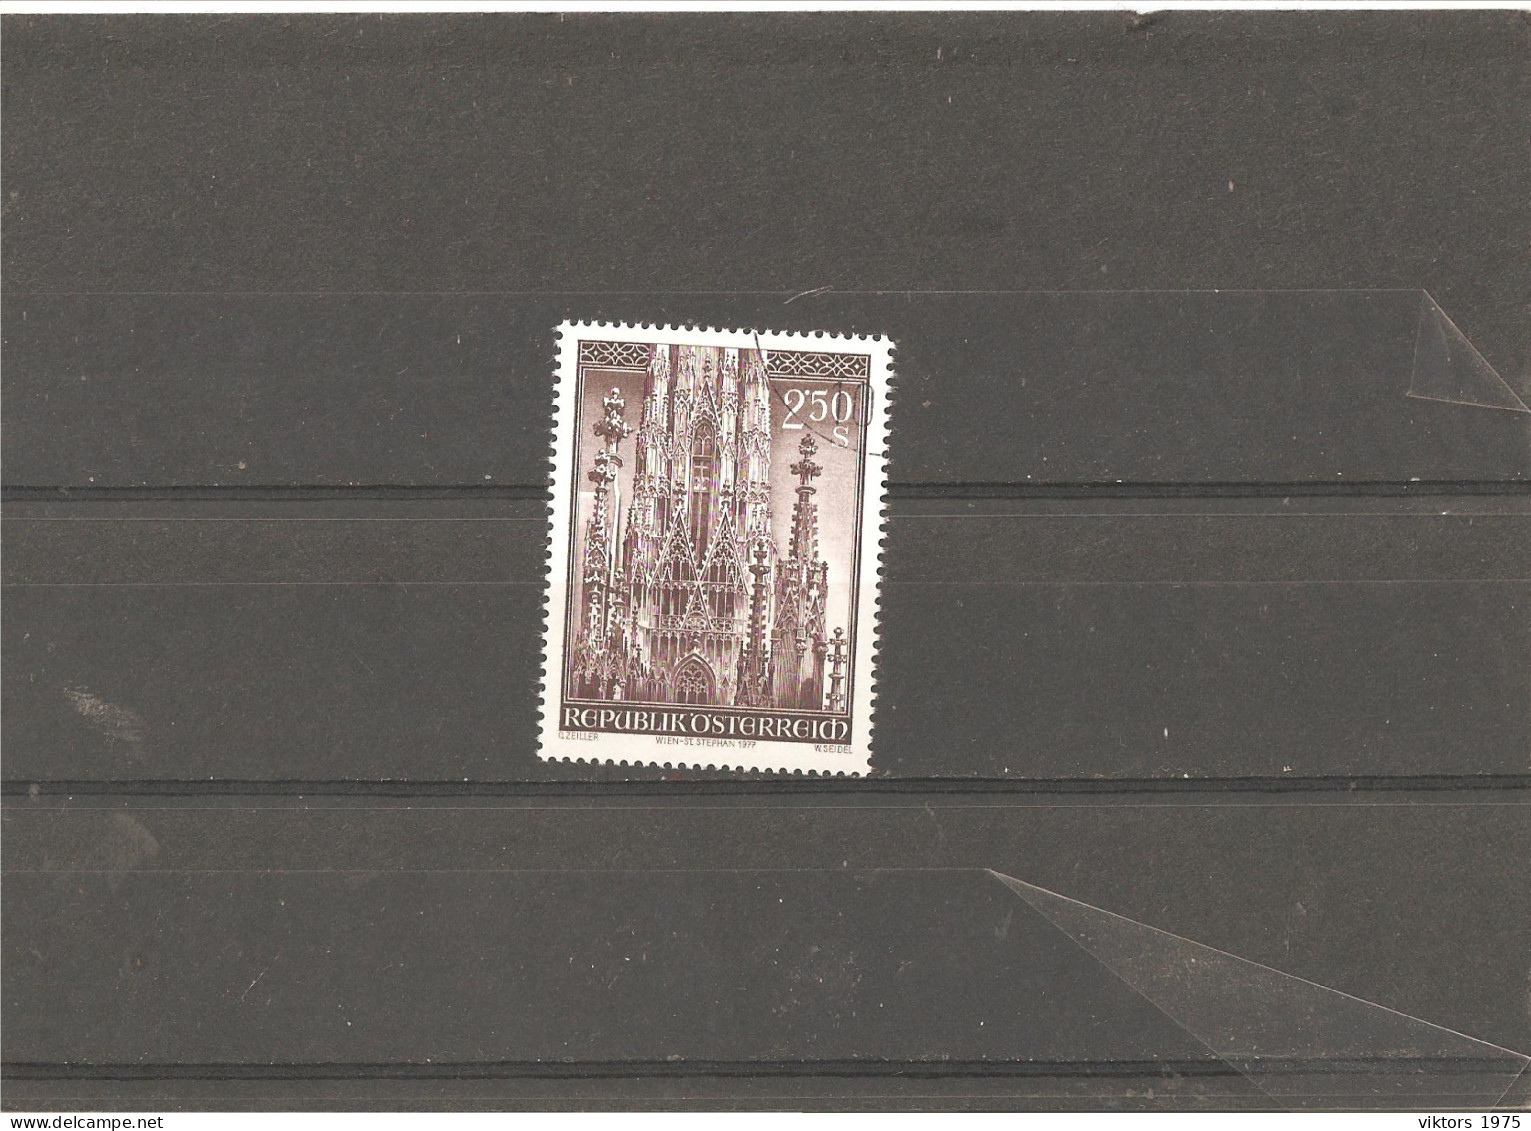 Used Stamp Nr.1544 In MICHEL Catalog - Used Stamps